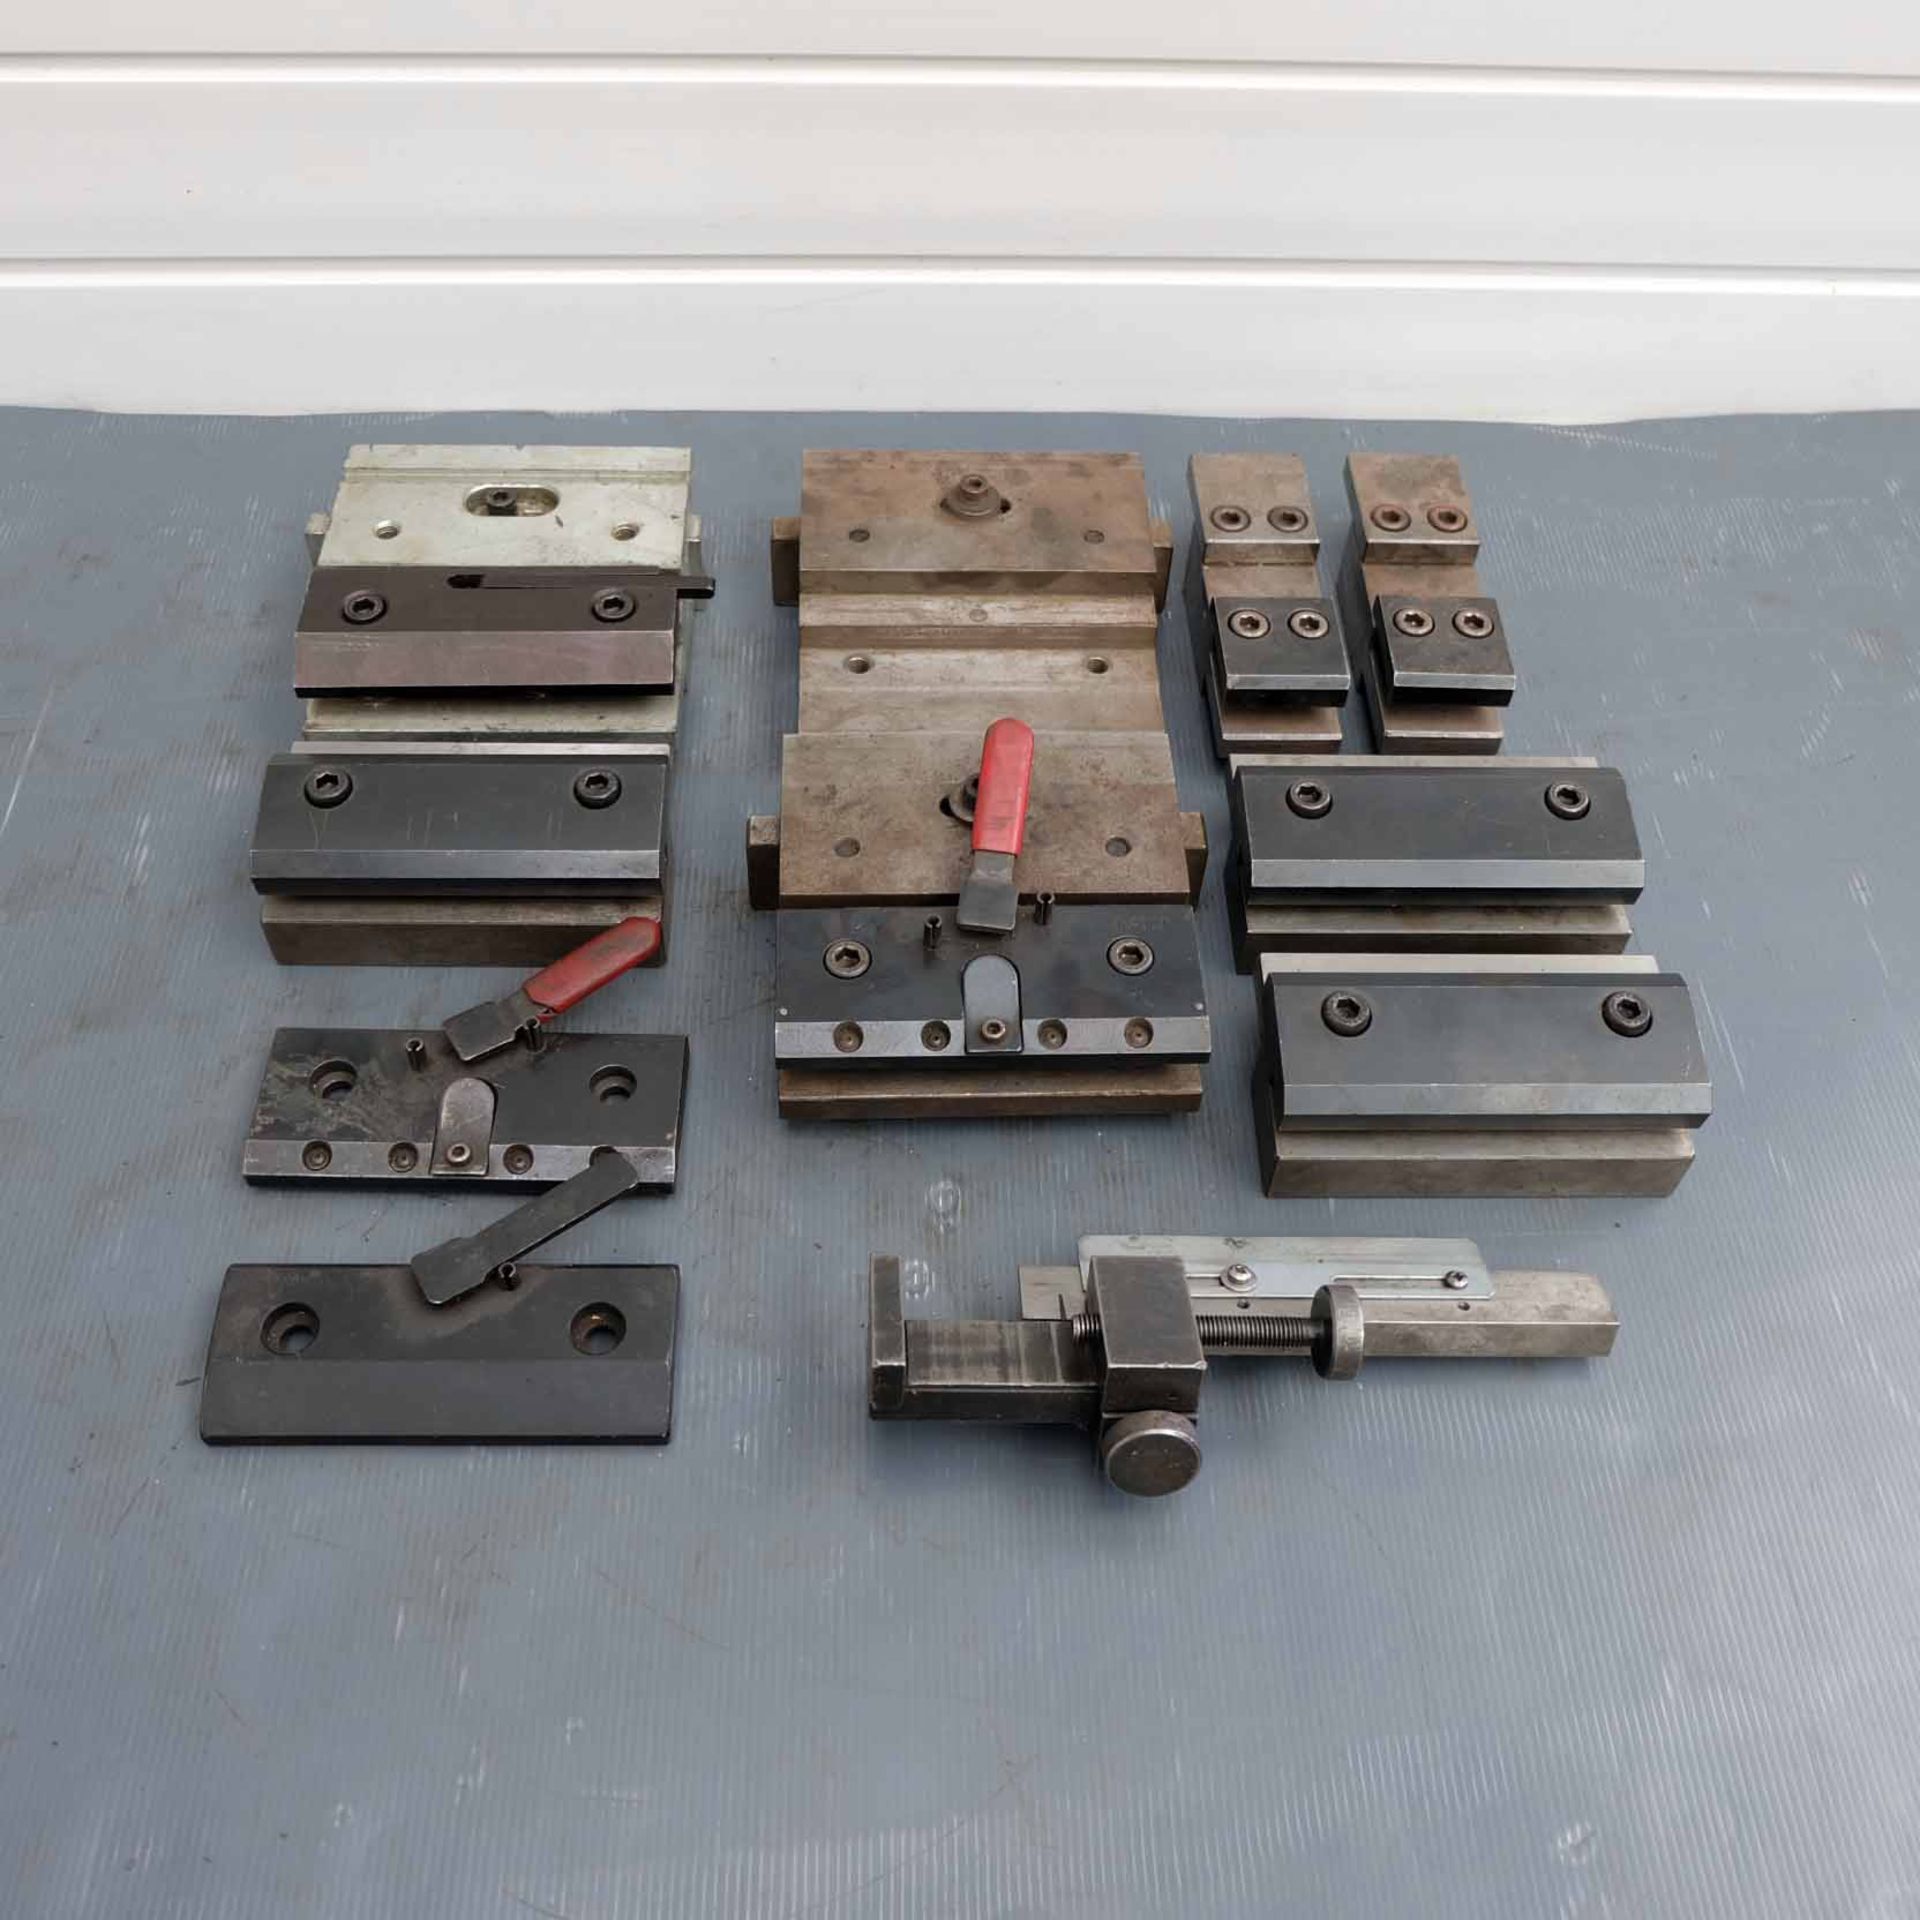 Quantity of Miscalaneous Press Brake Top Tool Clamps. Various Makes & Styles.